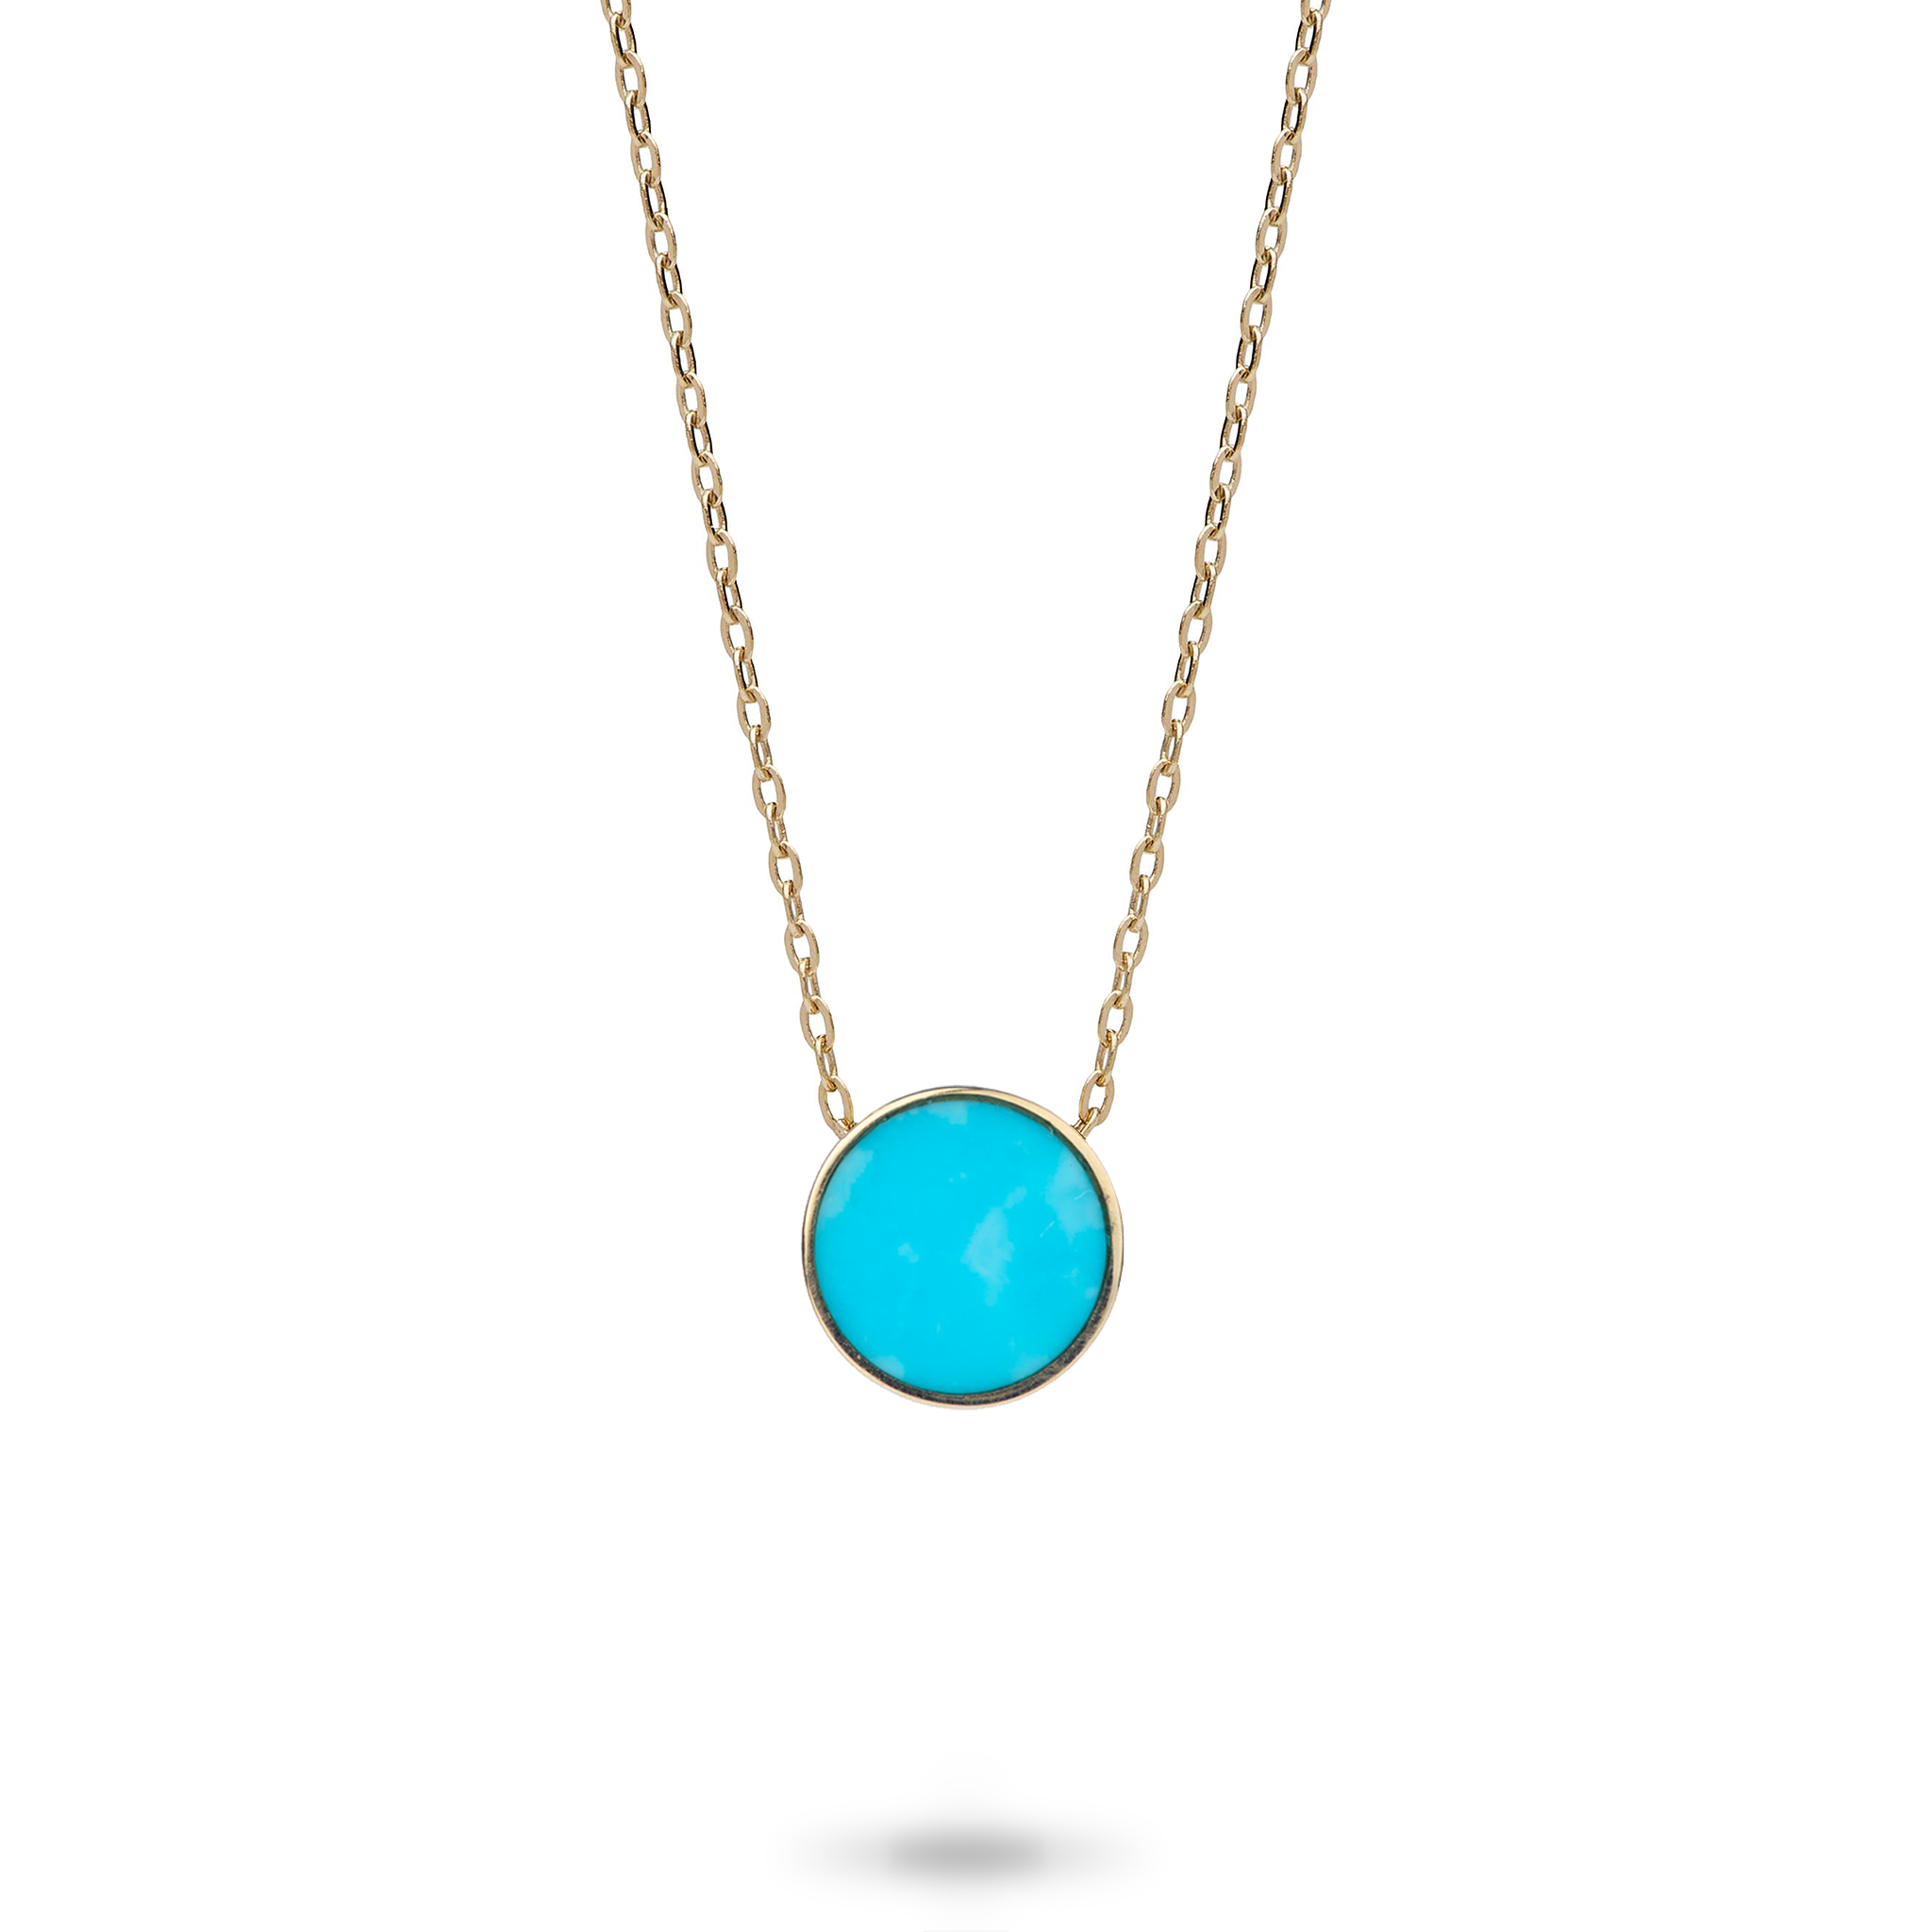 16-18" Adjustable Eclipse Flipside Turquoise & Mother of Pearl Necklace in Gold - 9mm